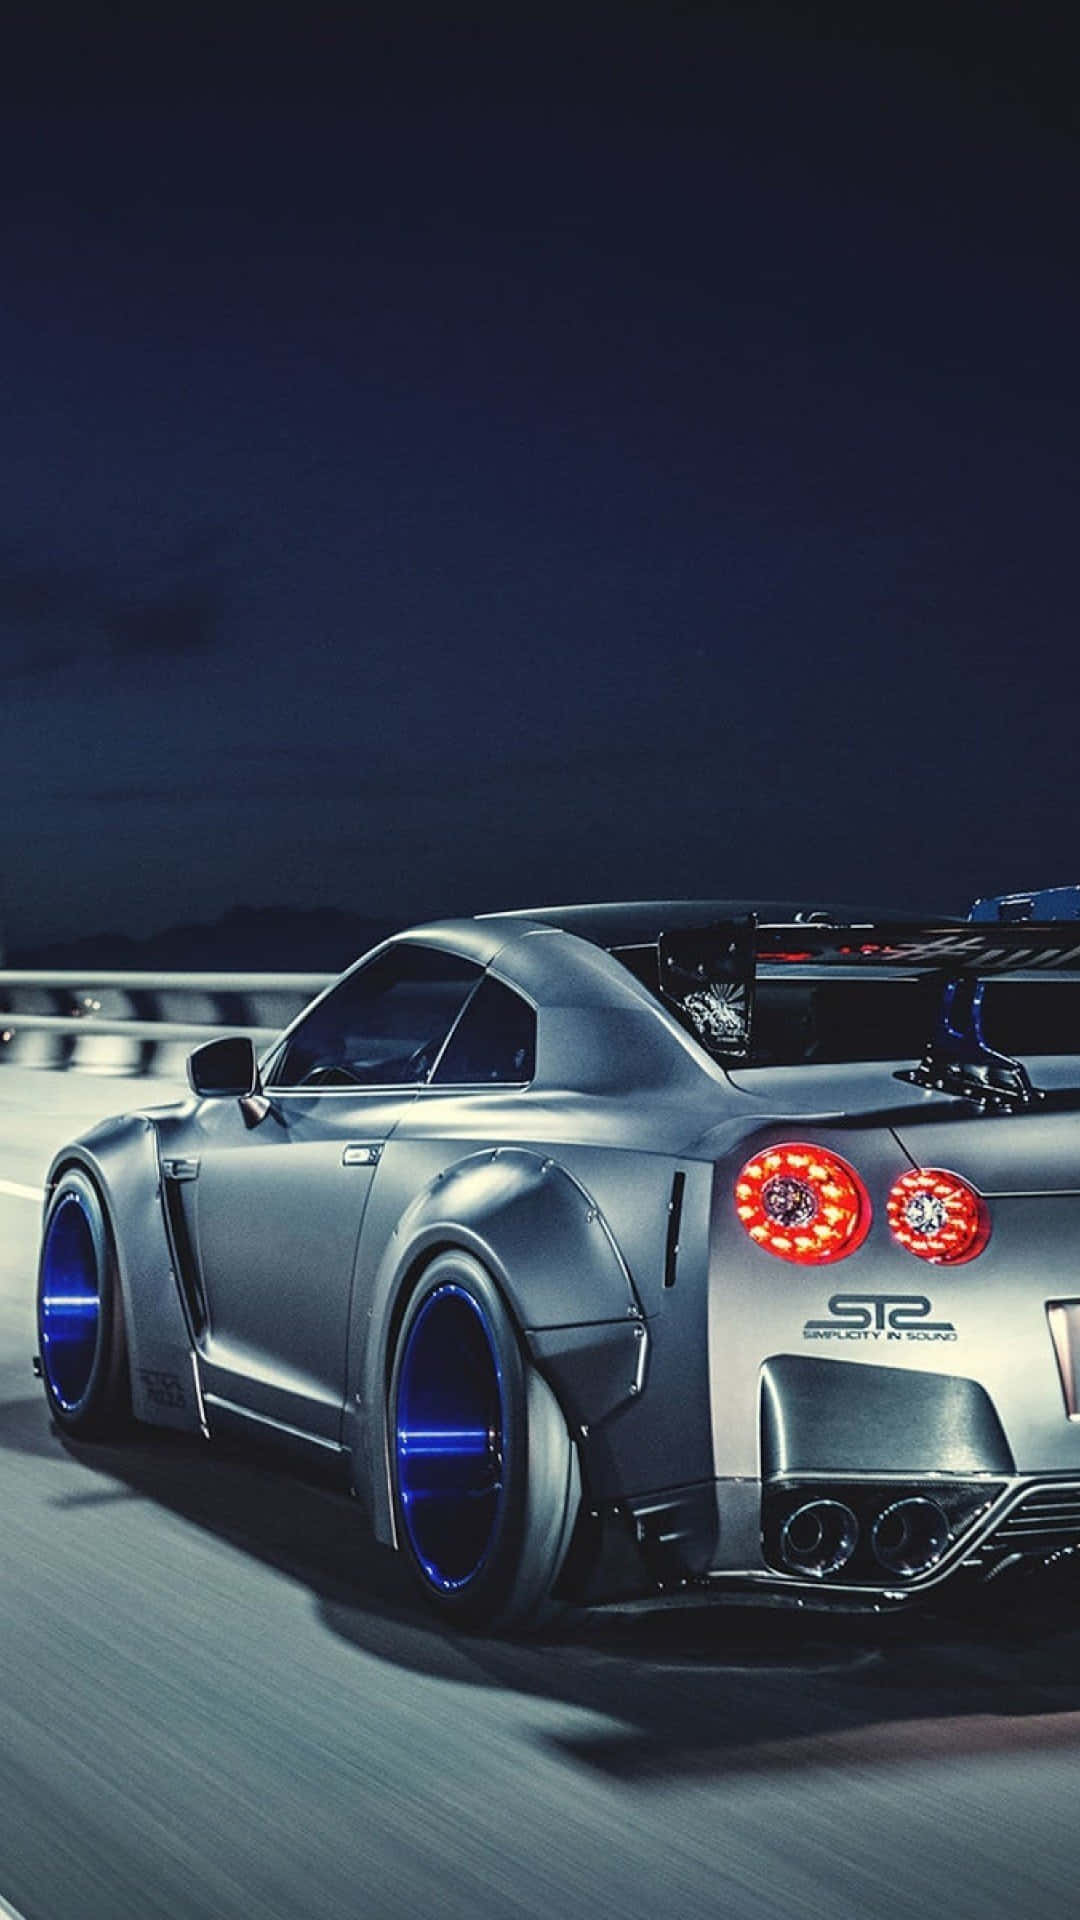 The Iconic Nissan Skyline iPhone Wallpaper